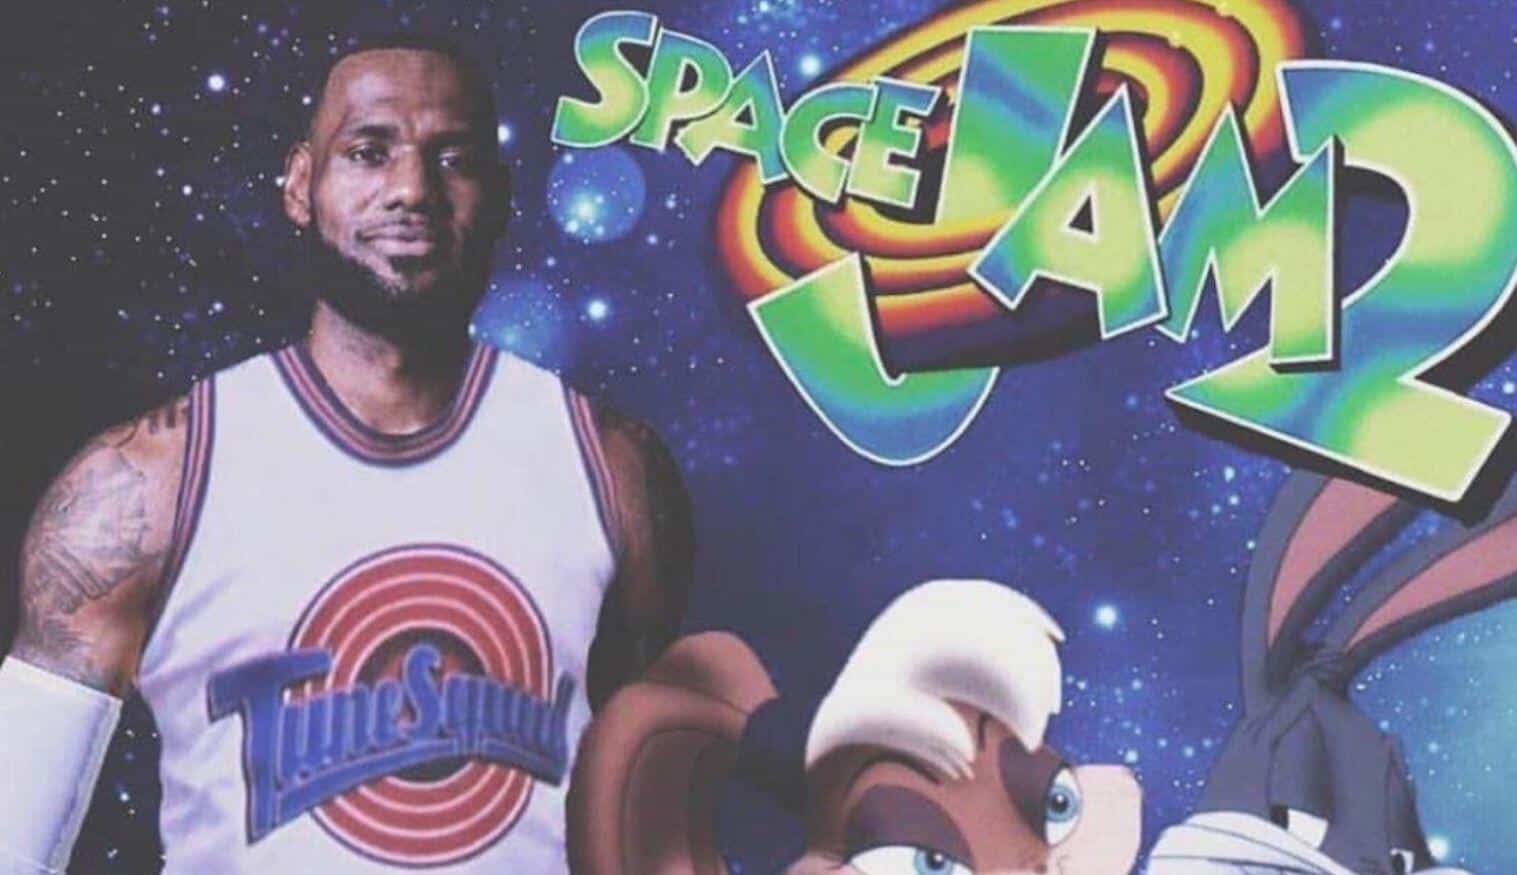 First Look At New Uniforms For LeBron James' 'Space Jam 2' Revealed